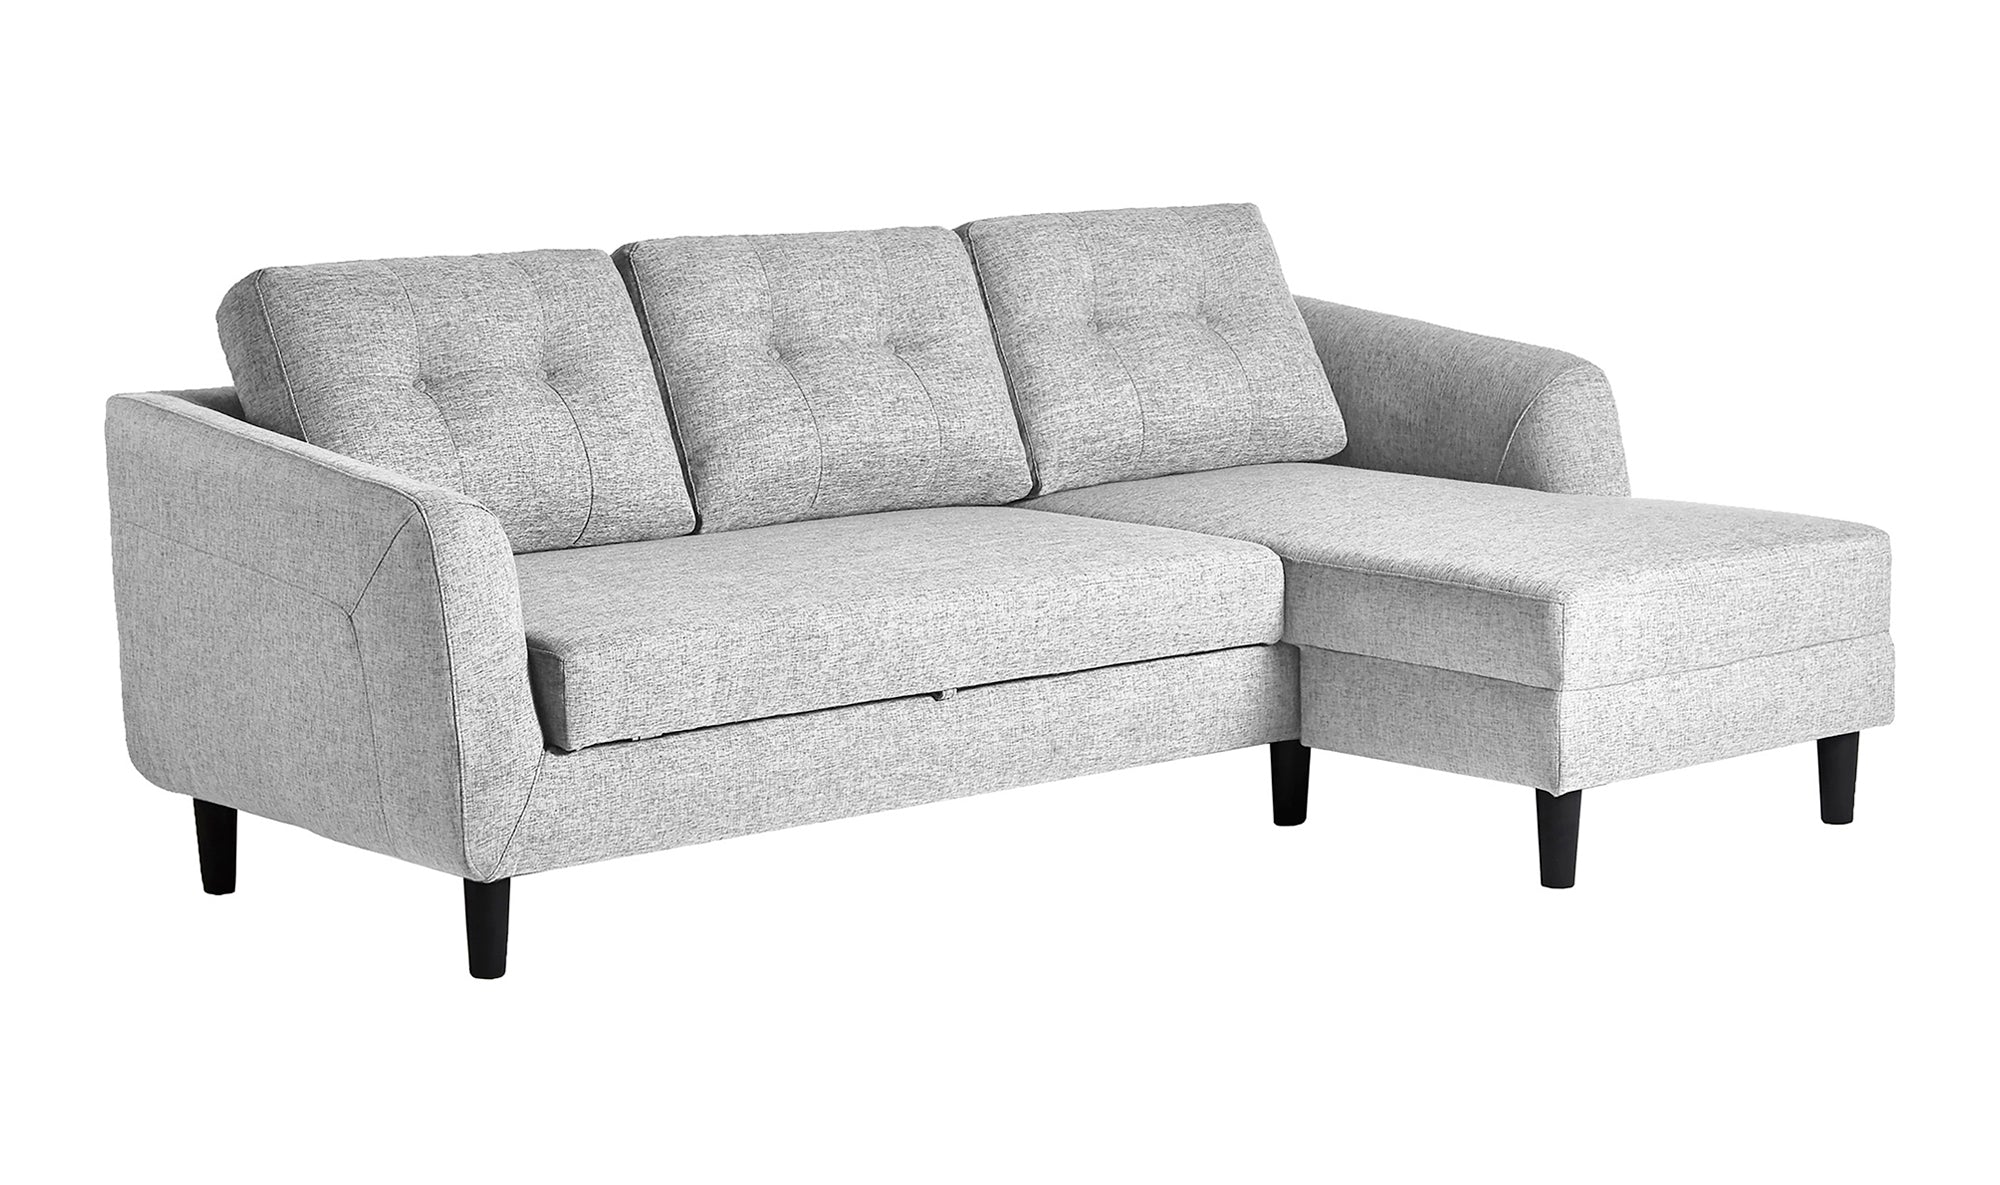 Belagio Right Facing Sofa Bed With Chaise - Light Grey